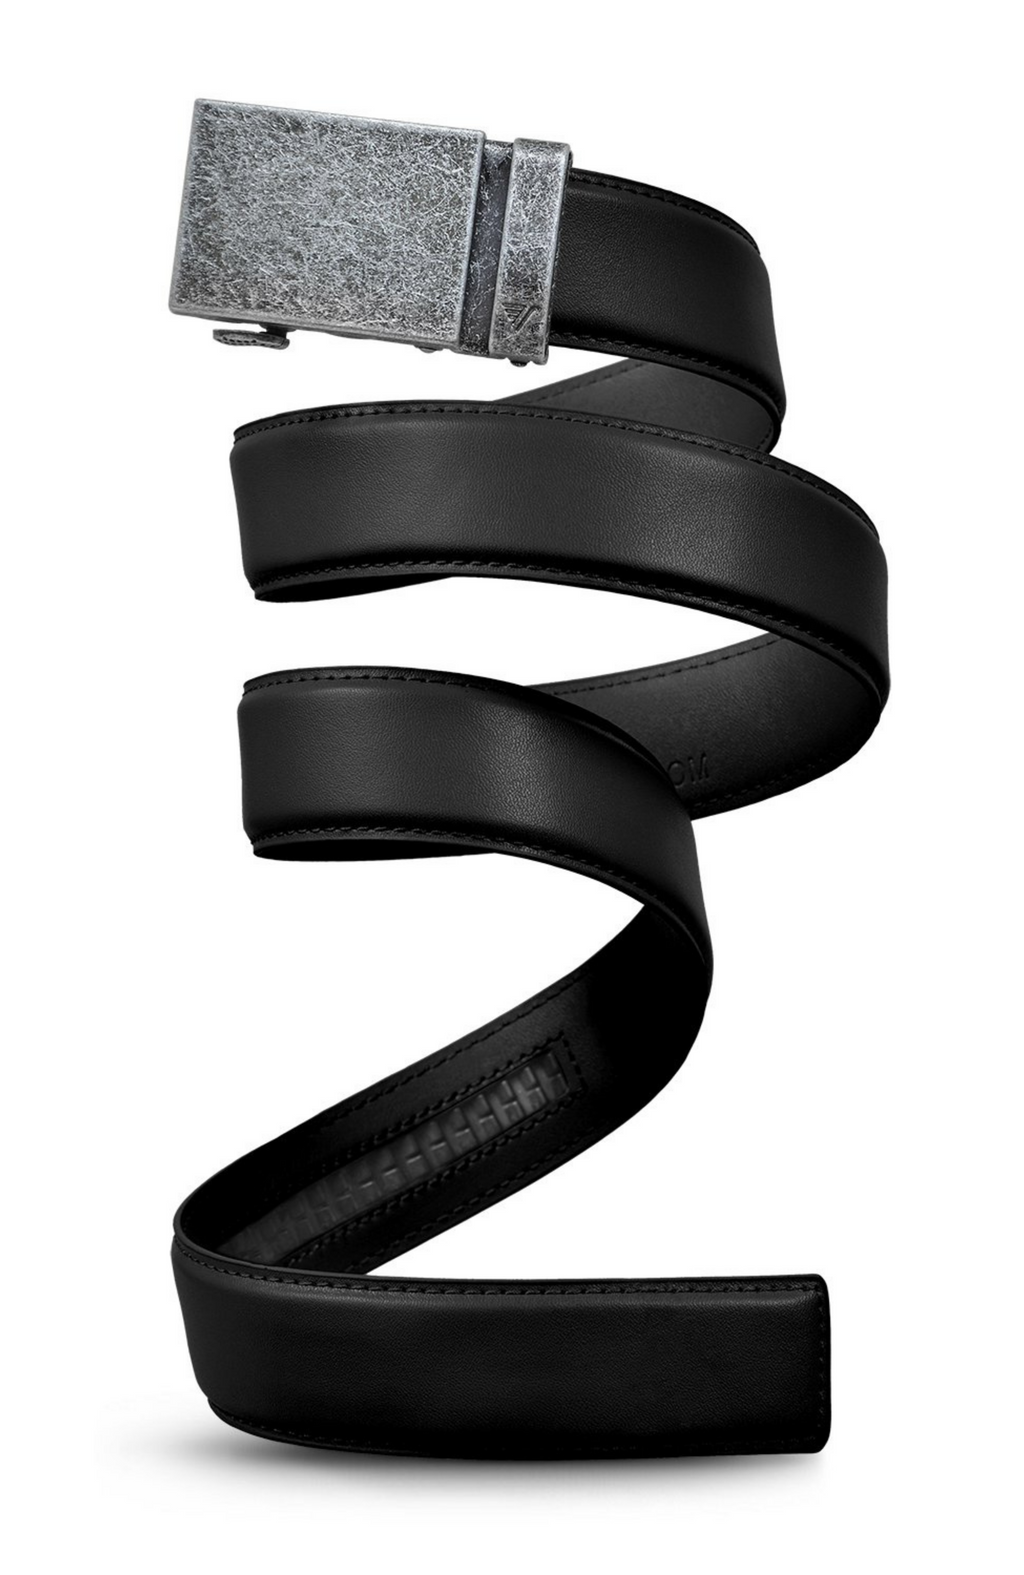 Mission Belt - Black Leather with Iron Buckle Belt